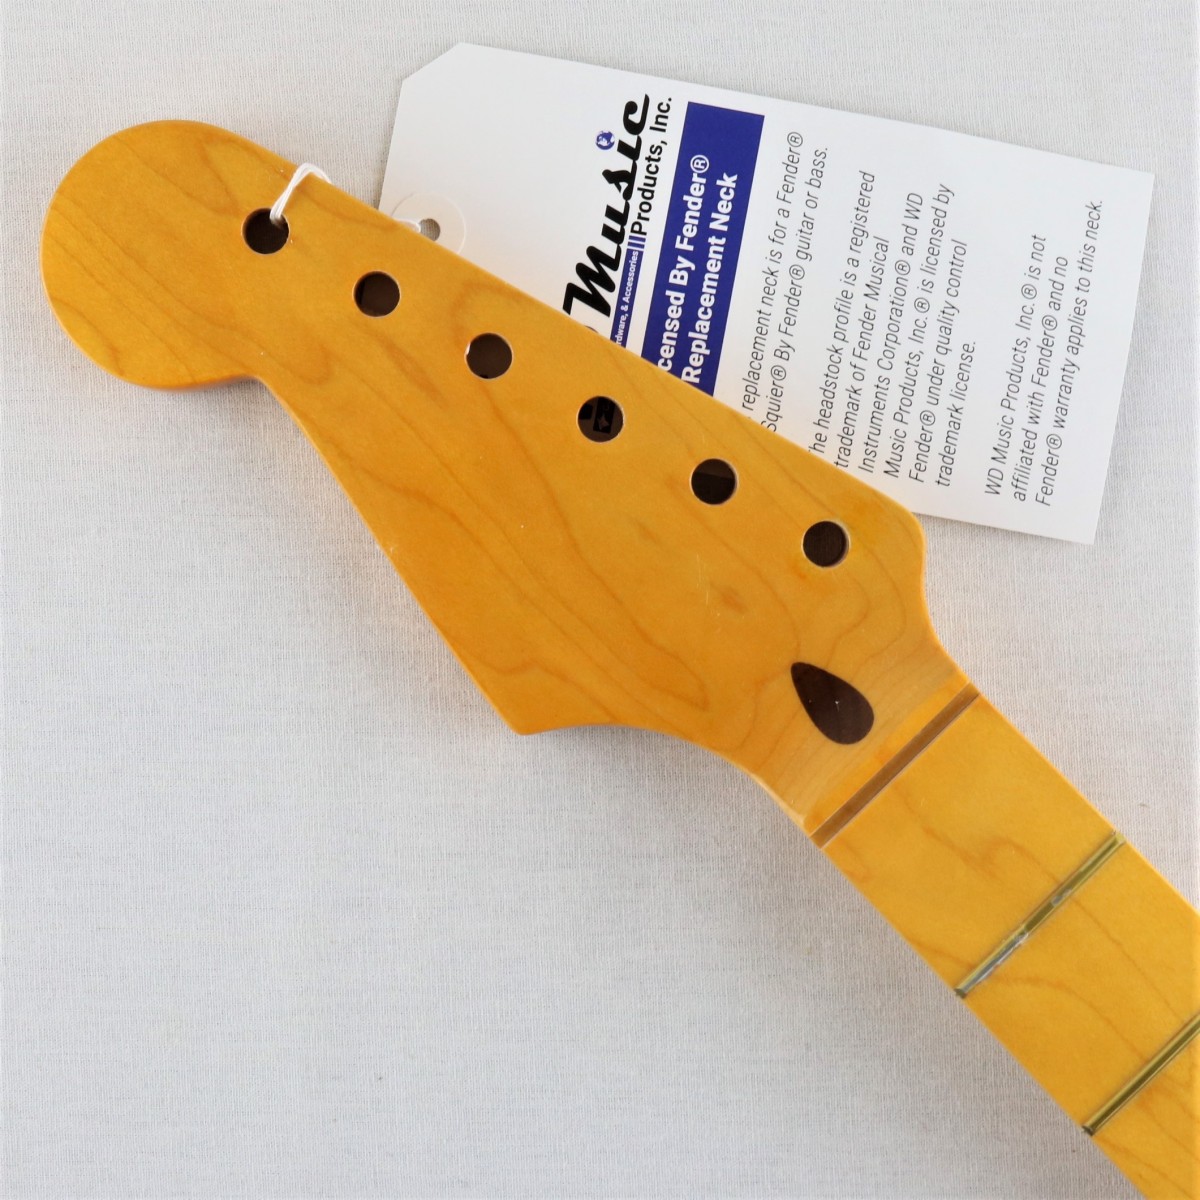 WD STRATOCASTER NECK MAPLE 21F R10 VINTAGE LEFTHAND